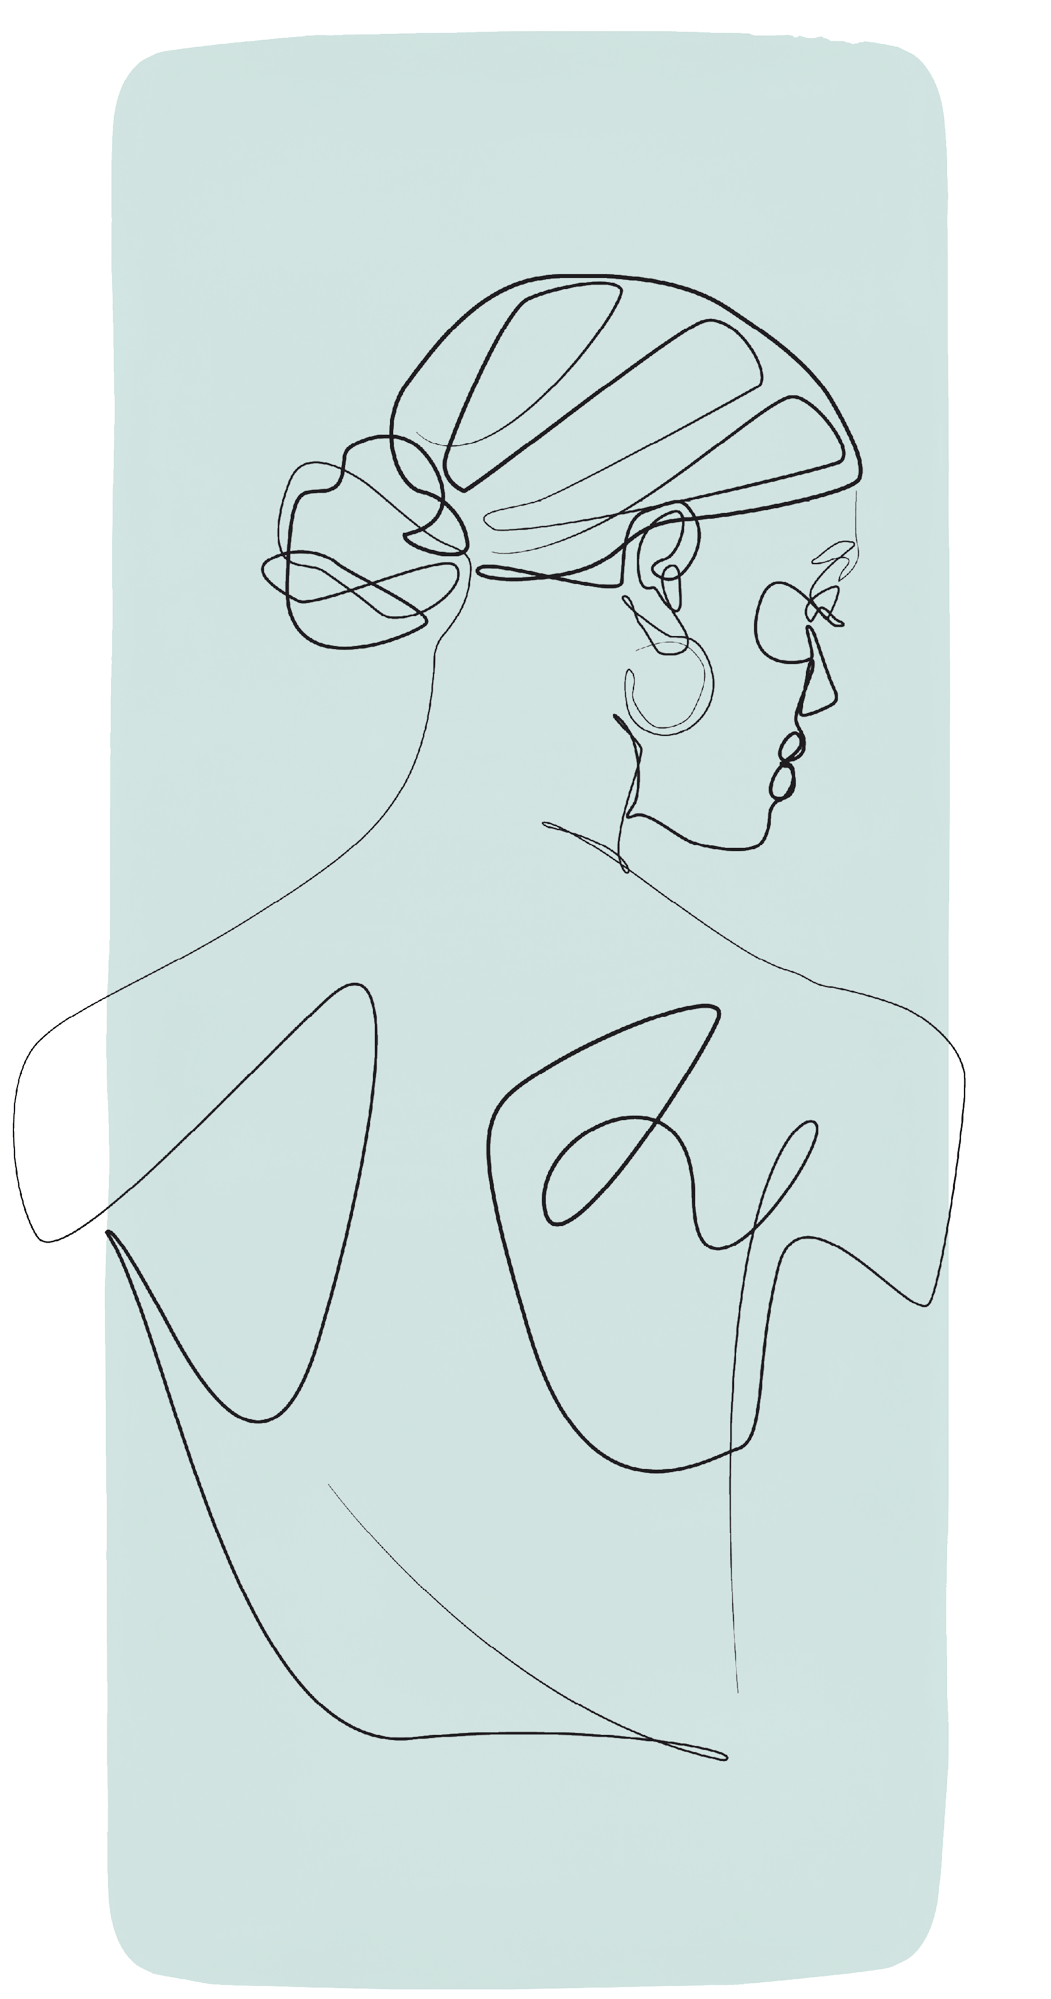 Line drawing of a woman